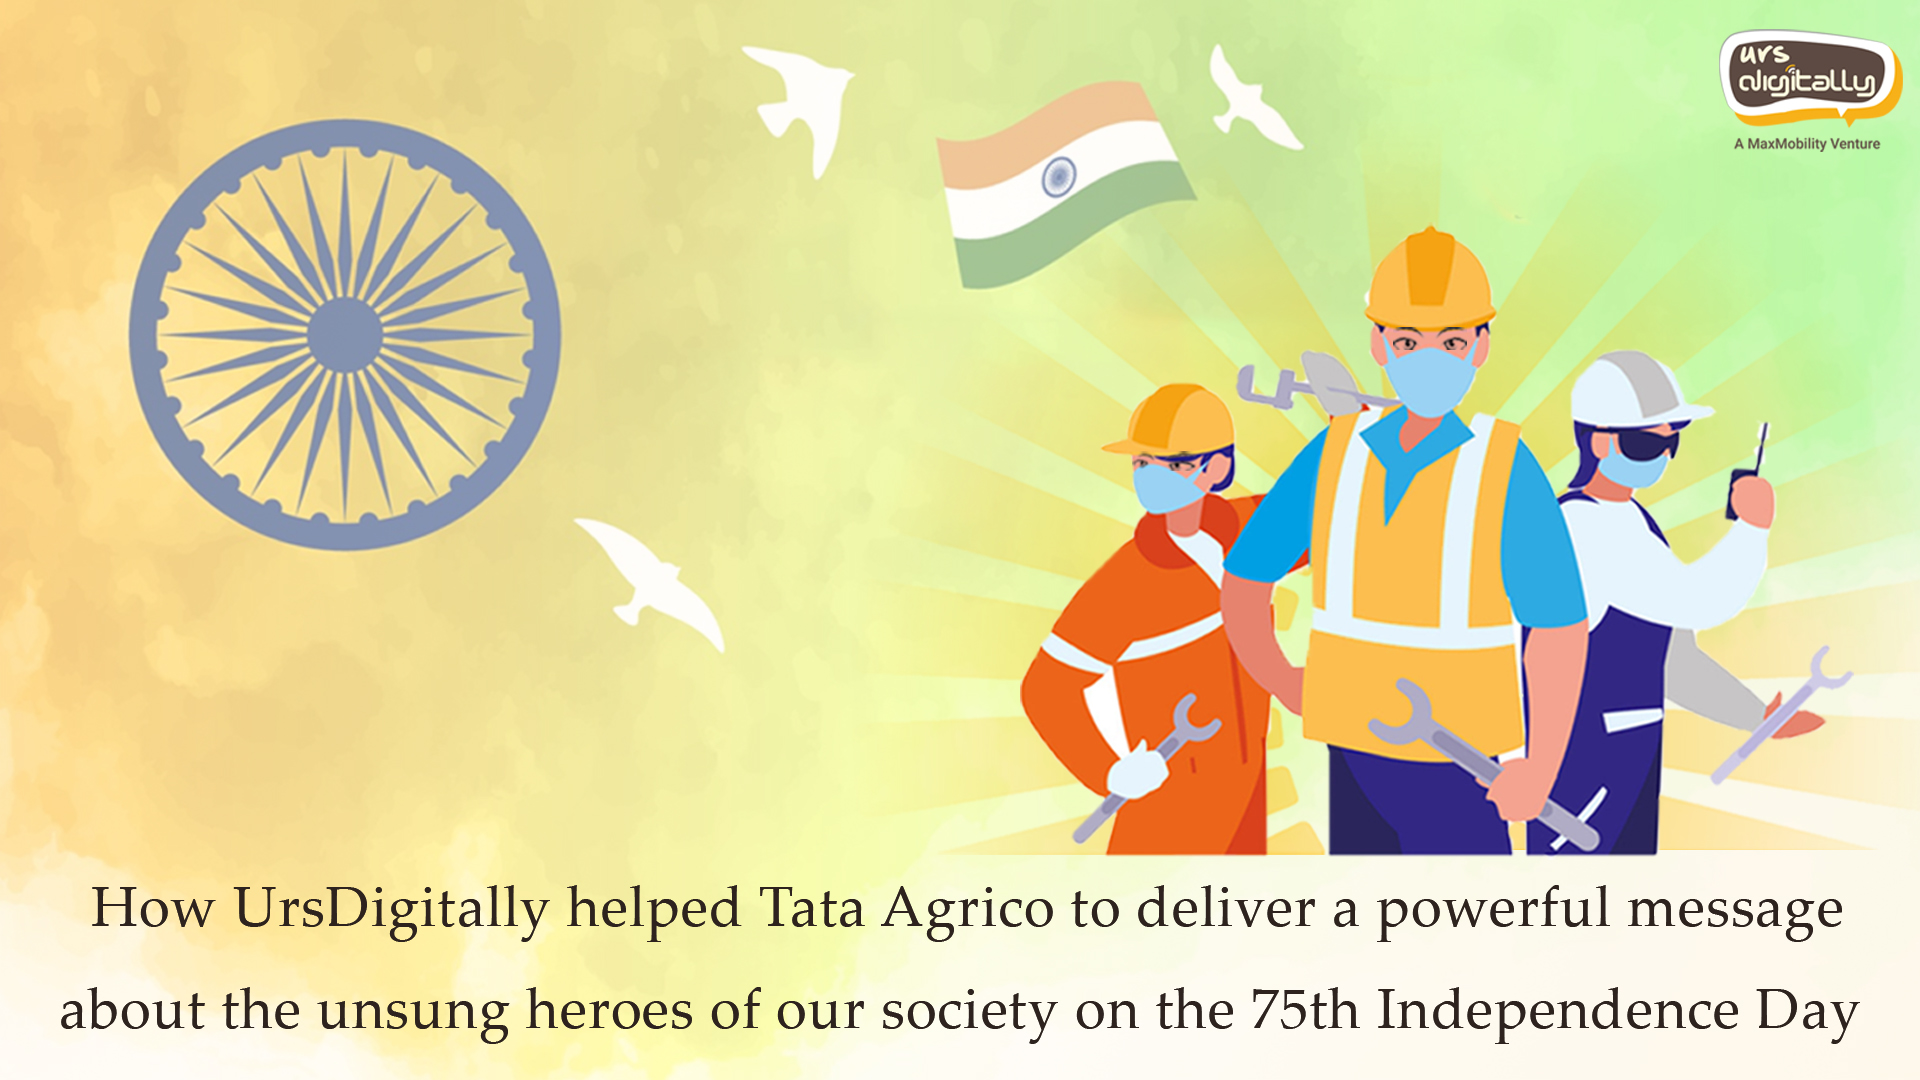 How UrsDigitally helped Tata Agrico to deliver powerful message about the unsung heroes